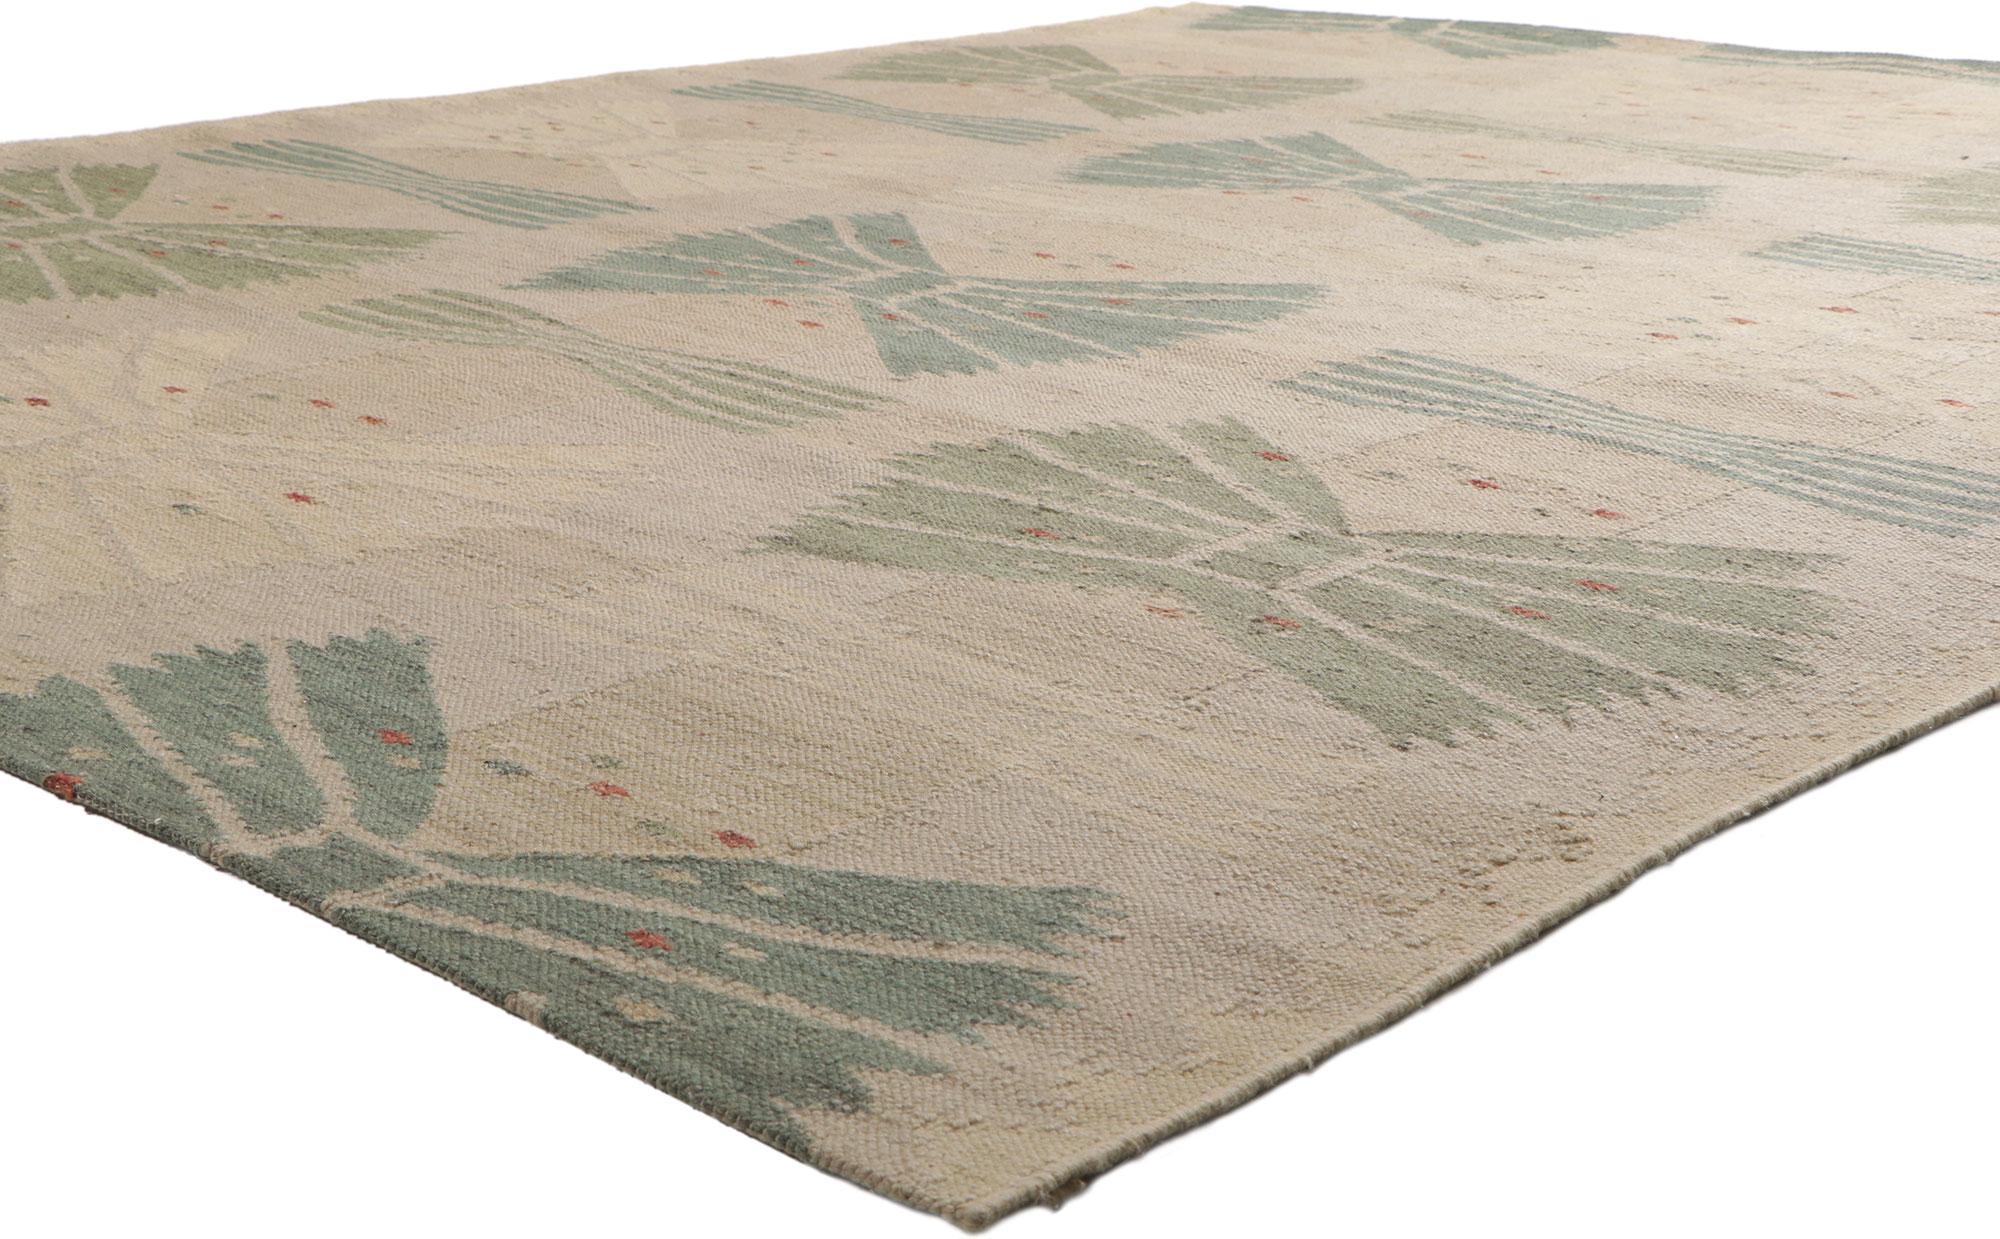 30797 New Swedish Style Kilim Rug Inspired by Barbro Nilsson and Marta Maas-Fjetterstrom 08'10 x 11'02. With its simplicity, geometric design and soft colors, this hand-woven wool Swedish inspired Kilim rug provides a feeling of cozy contentment